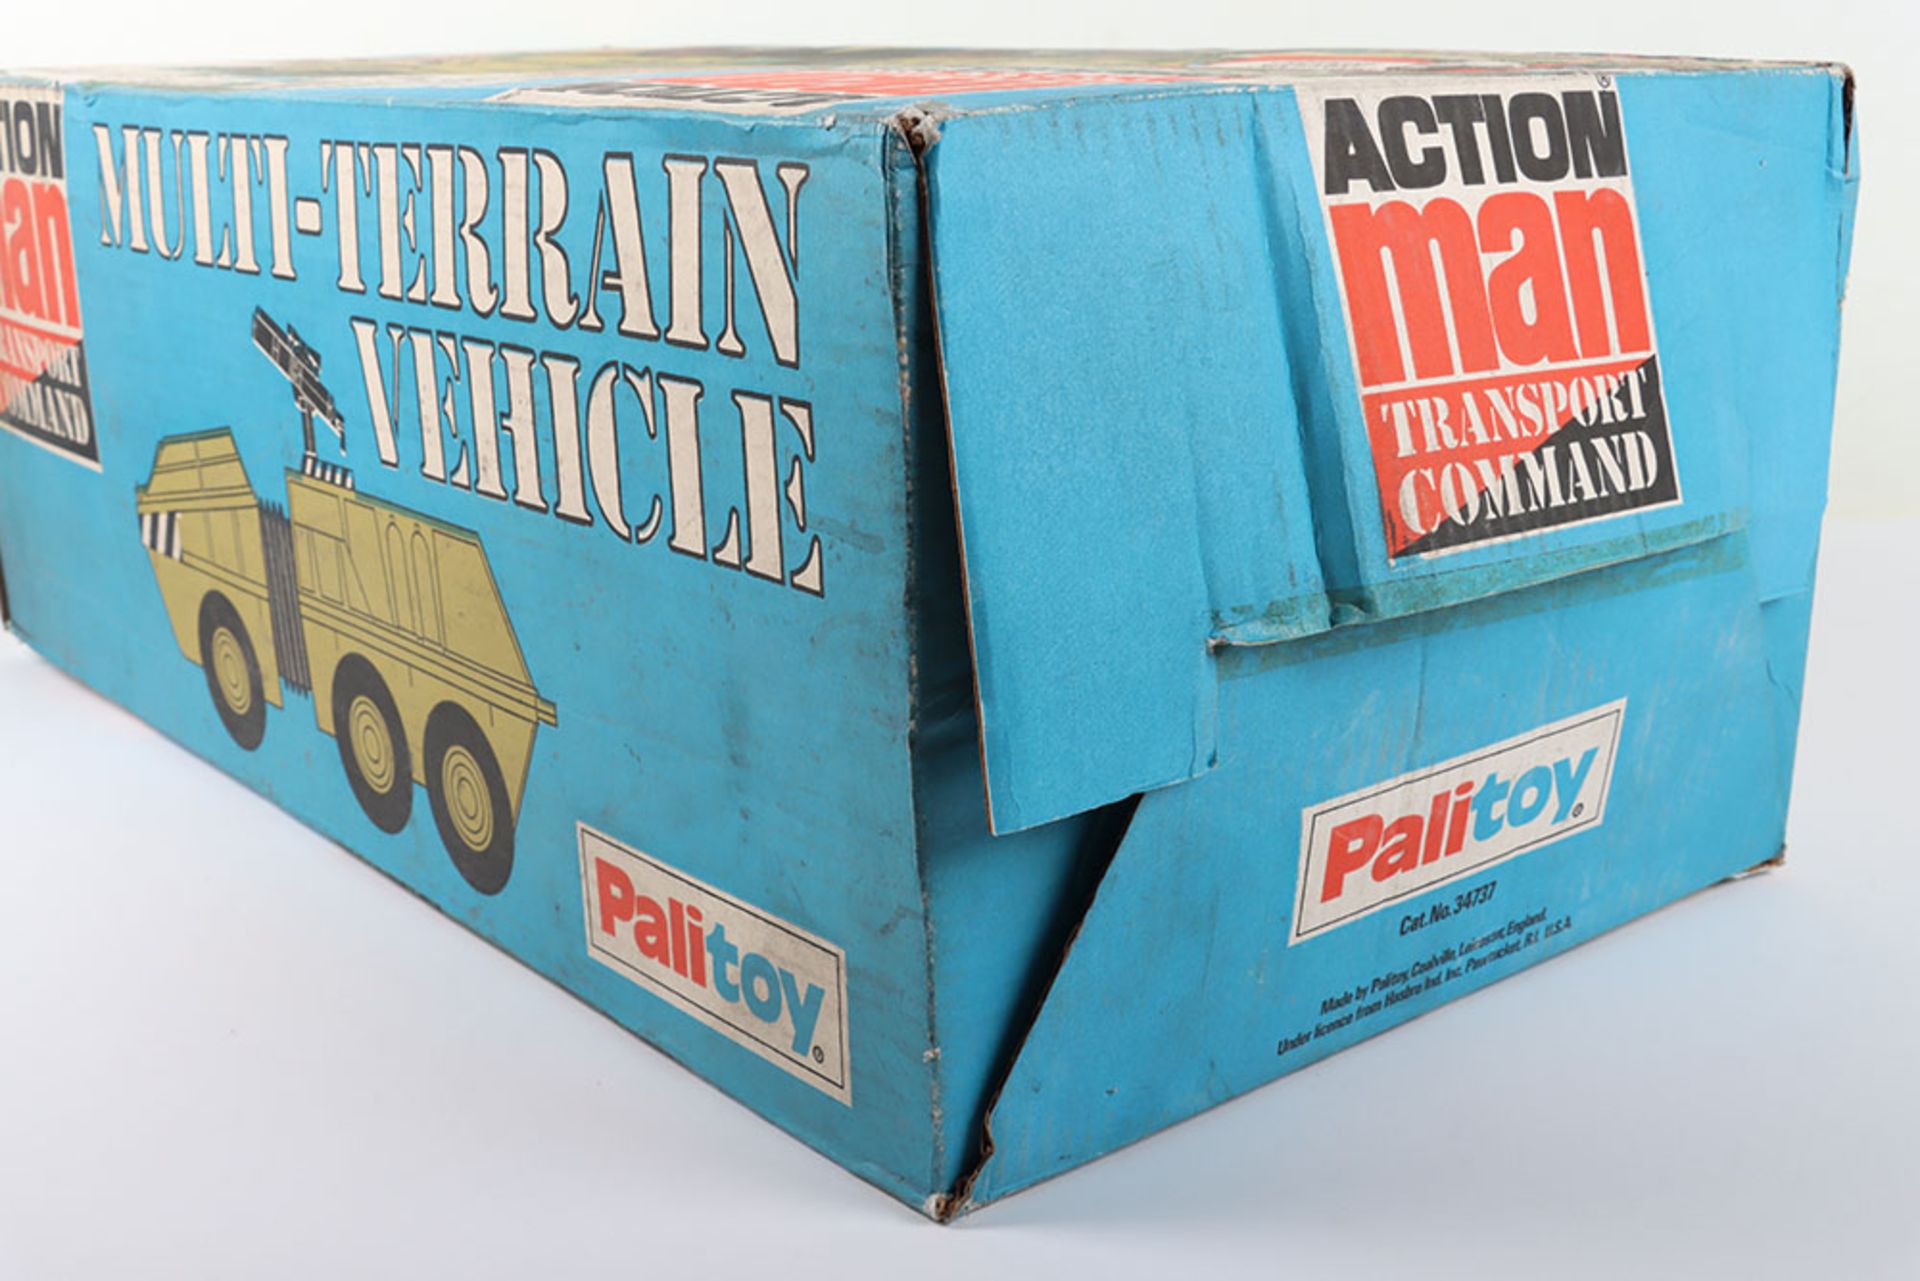 Palitoy Action Man Transport Command Multi-Terrain Vehicle - Image 7 of 8